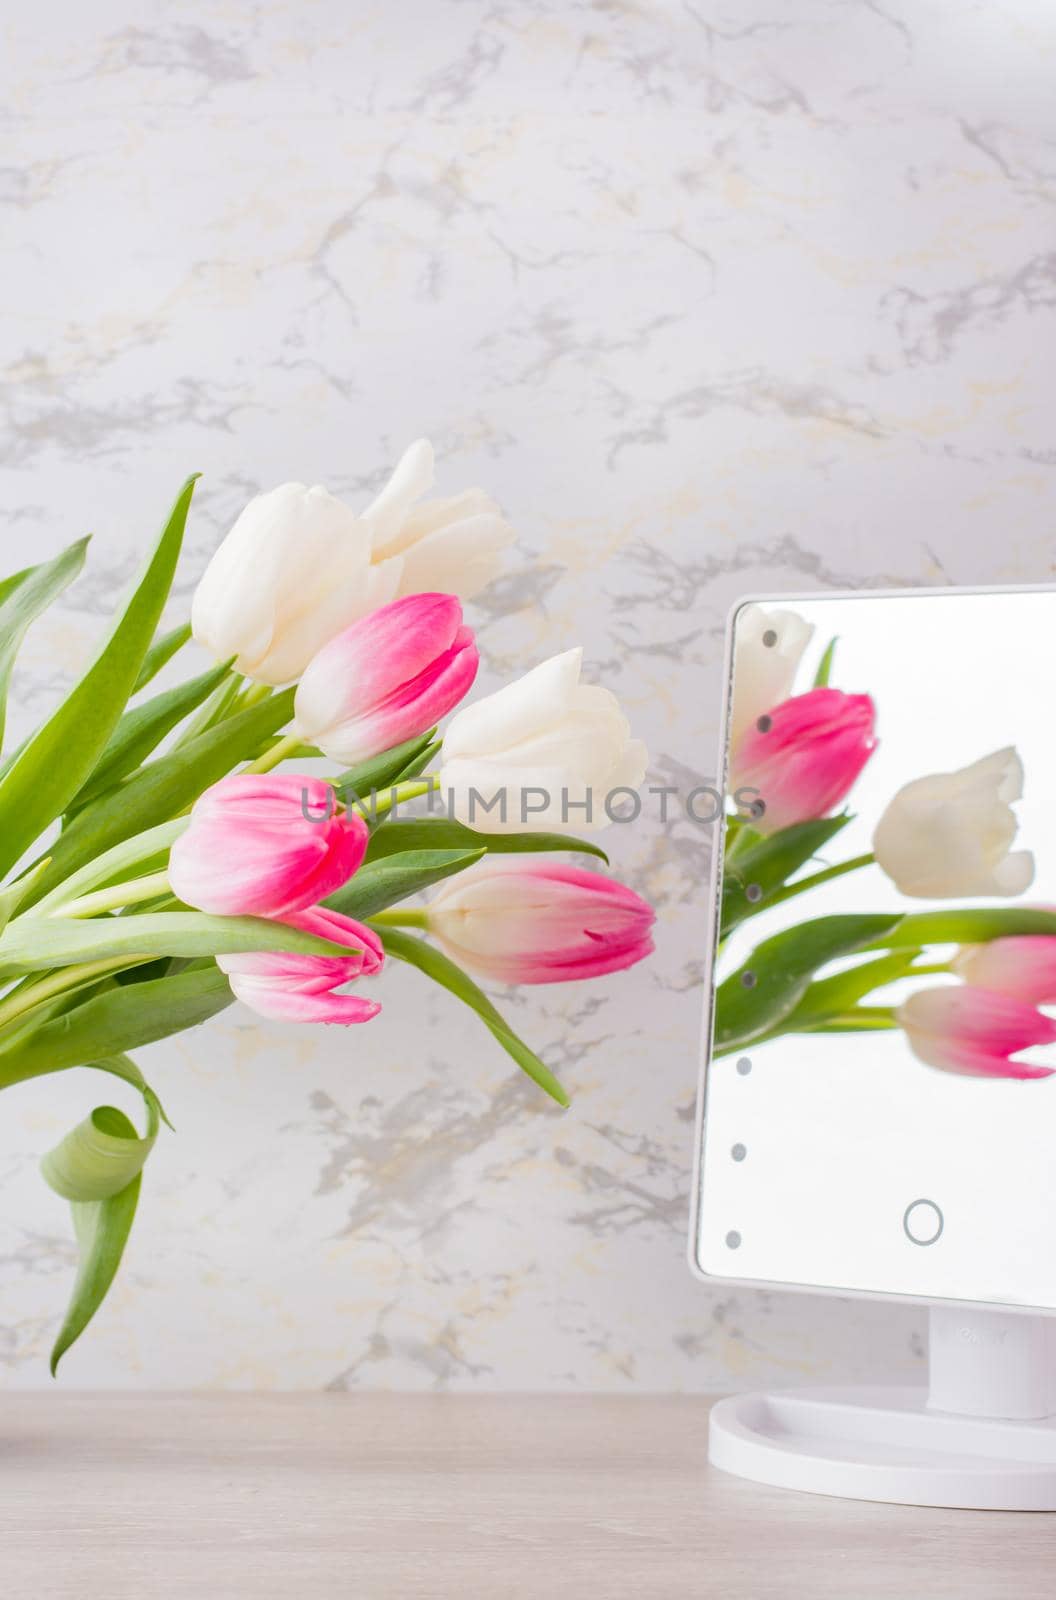 A bouquet of white and pink tulips with green leaves stands in a jug on the table and is reflected in the mirror. Selective focus. Vertical view